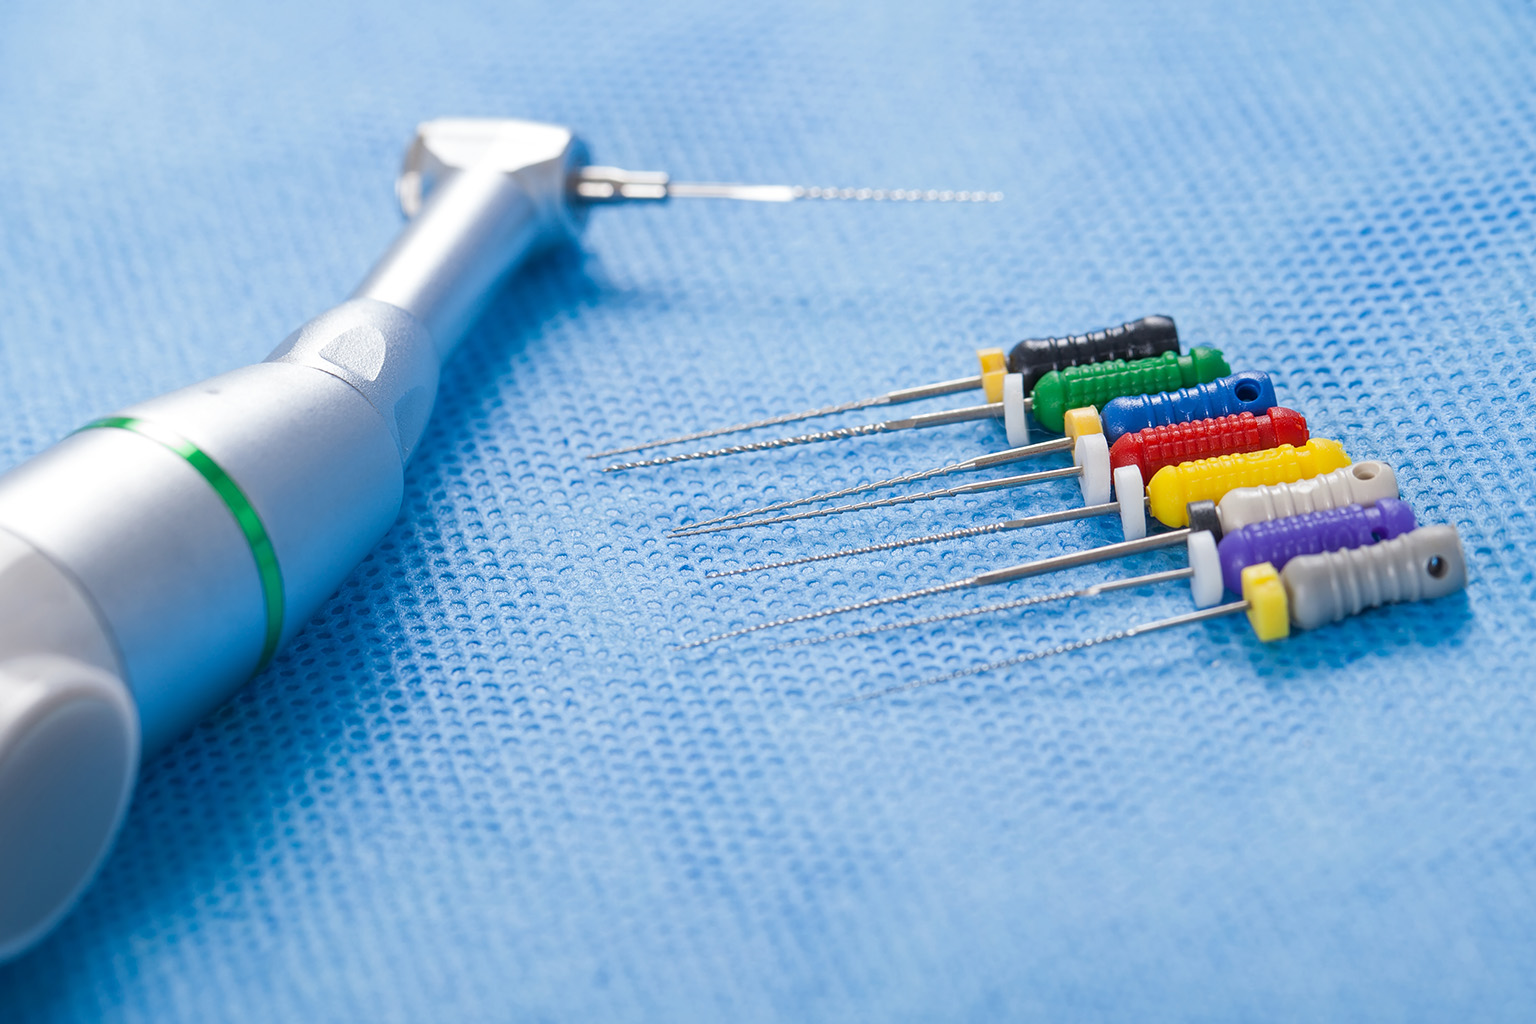 root canal tools on a blue cloth